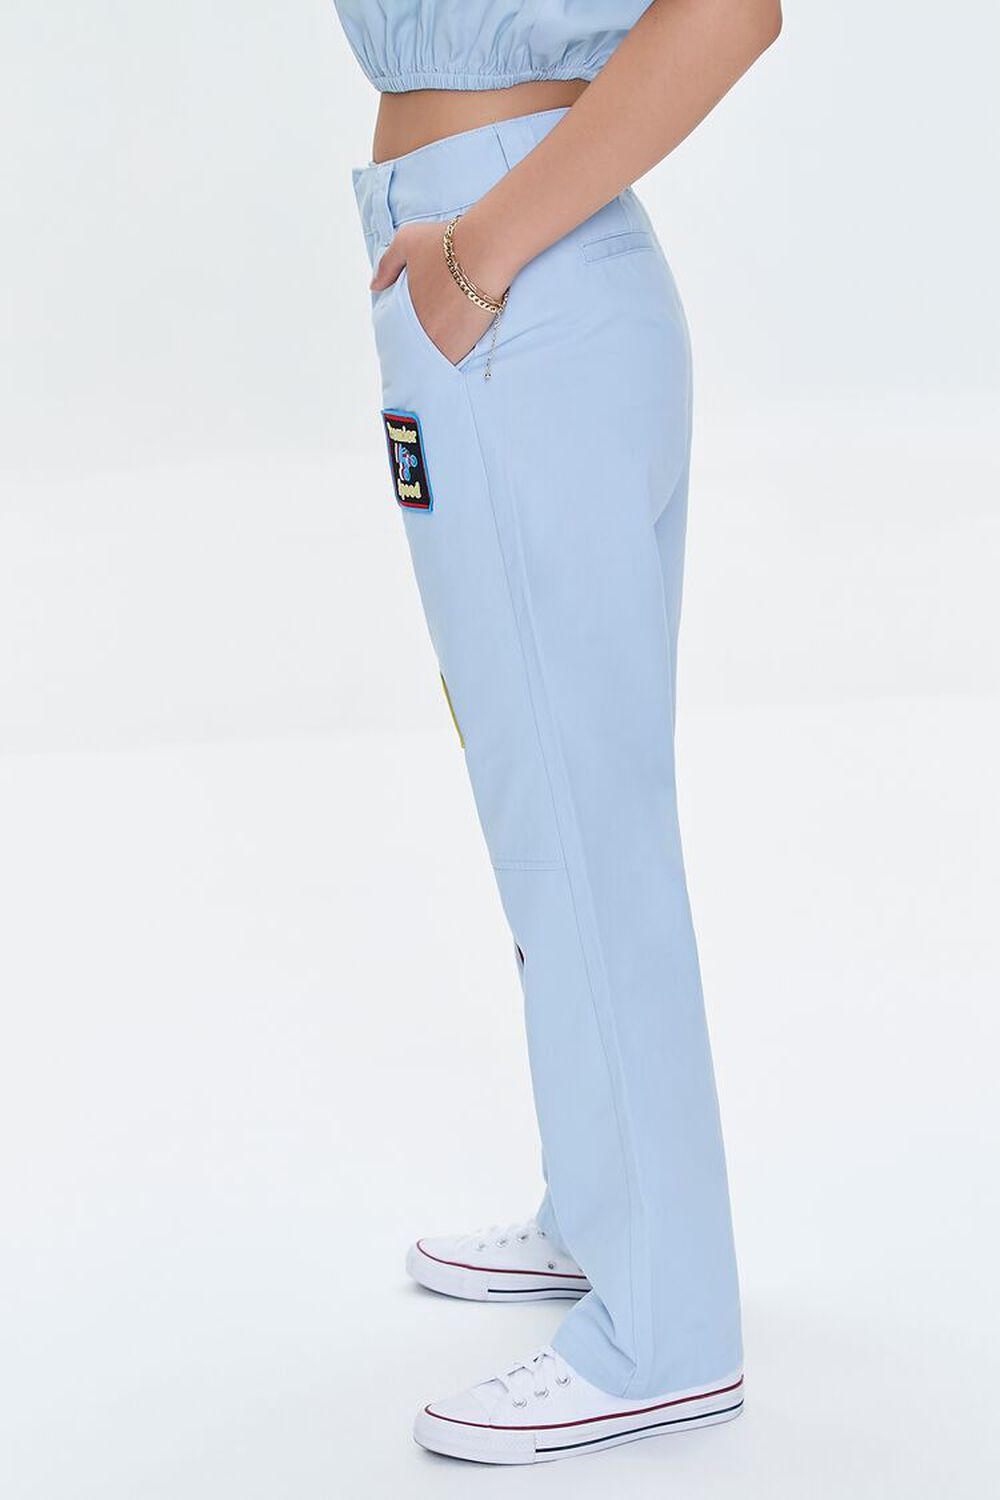 SKY BLUE 900 Series Club Patch Graphic Pants, image 3